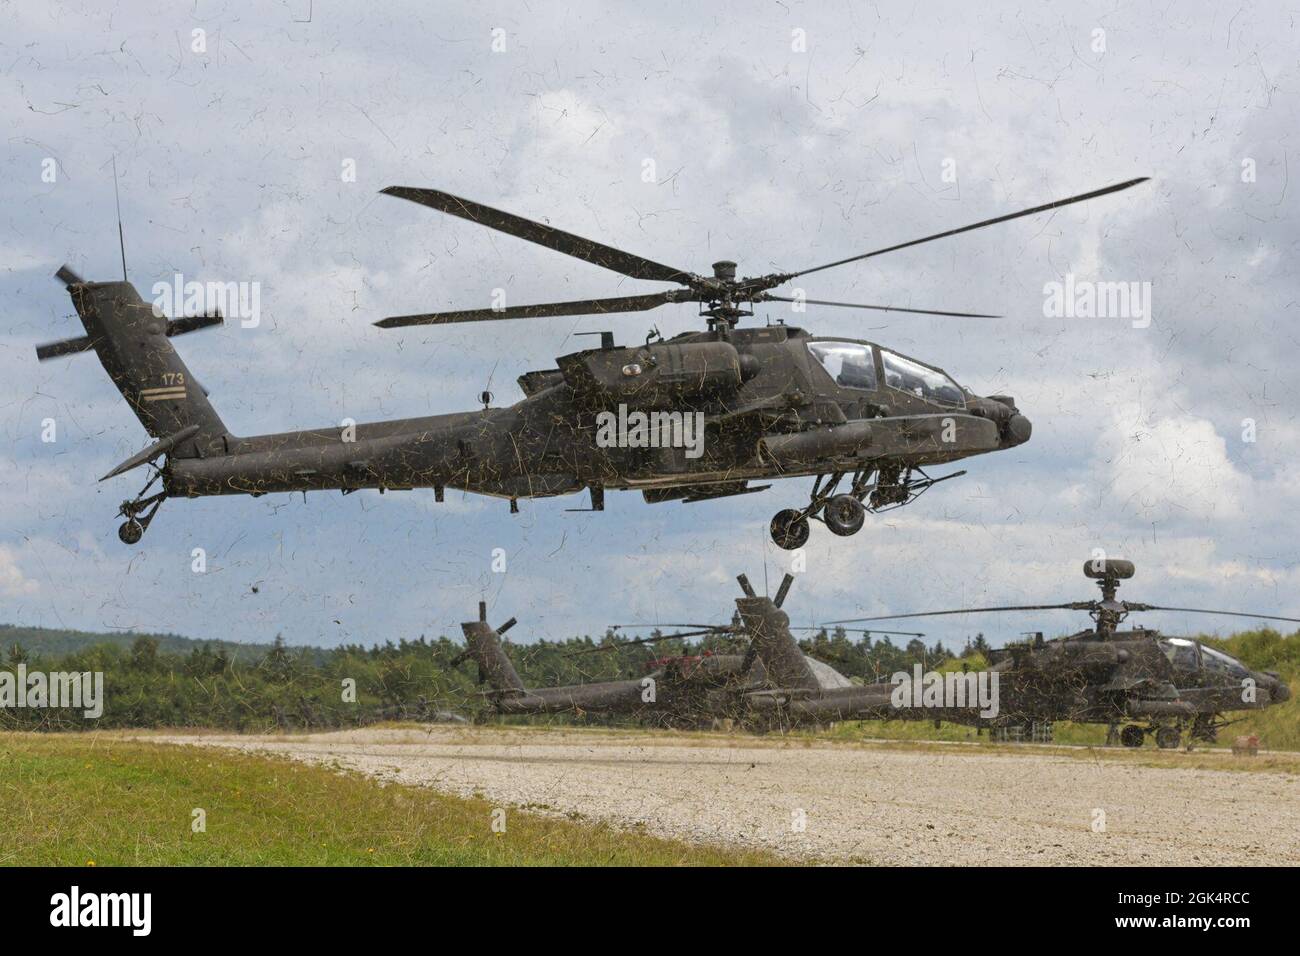 U.S. Soldiers, assigned to 1st Combat Aviation Brigade, 1st Infantry Division, come in for a landing at a forward arming and refueling point in a AH-64D Apache Longbow attack helicopter prior to aerial gunnery training at the 7th Army Training Command's Grafenwoehr Training Area, Germany, Aug. 4, 2021. Stock Photo